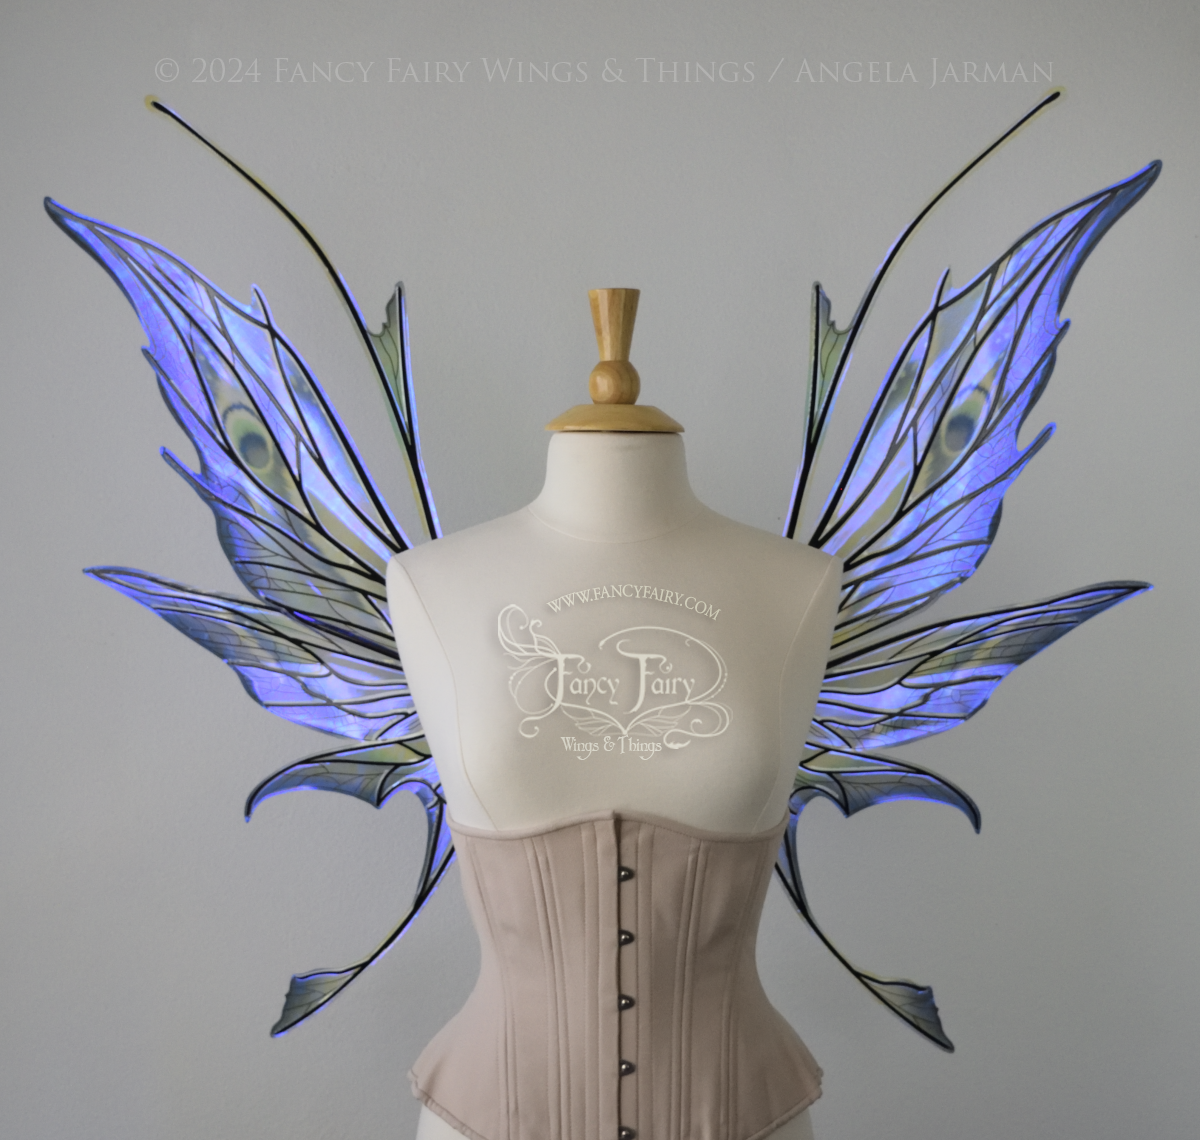 Made to Order Cosette Convertible Iridescent "Pix" Fairy Wings with Black veins